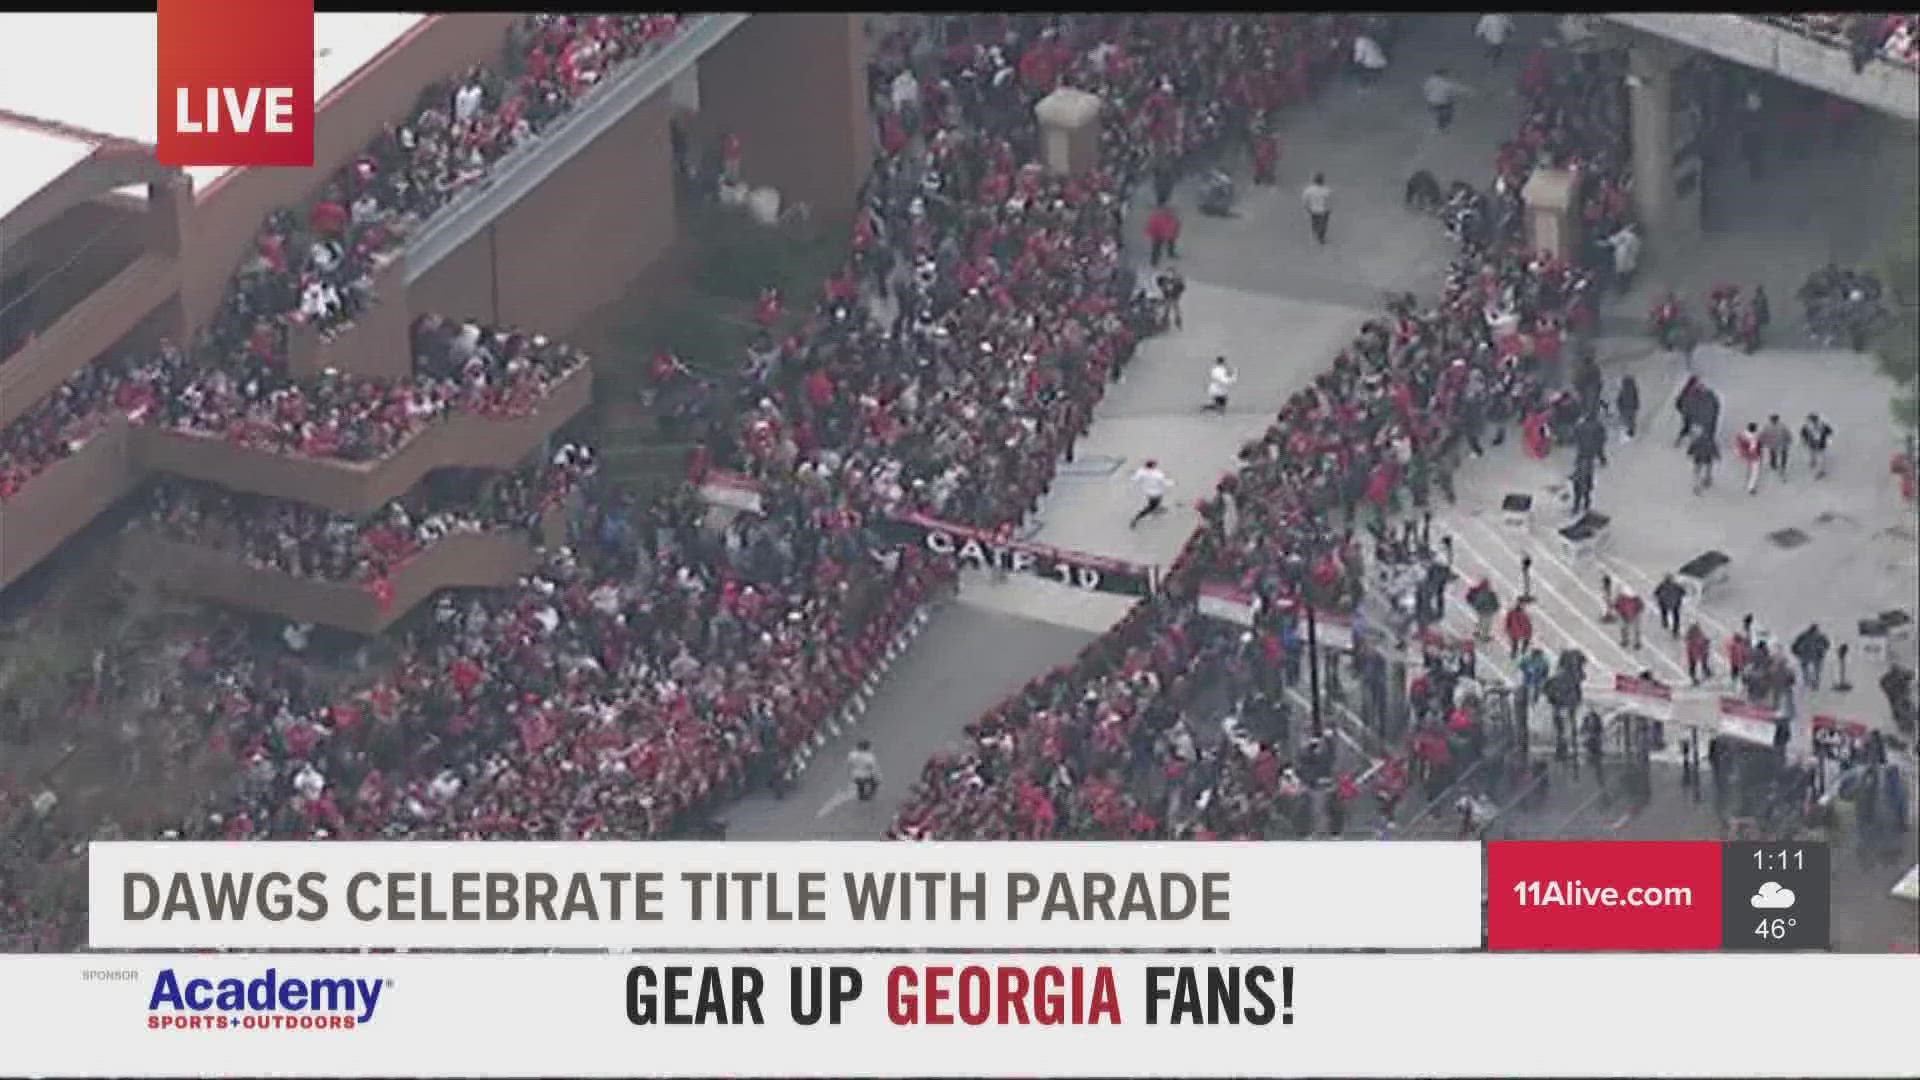 The Dawg Walk happened after the parade and before the celebration at Sanford Stadium in Athens